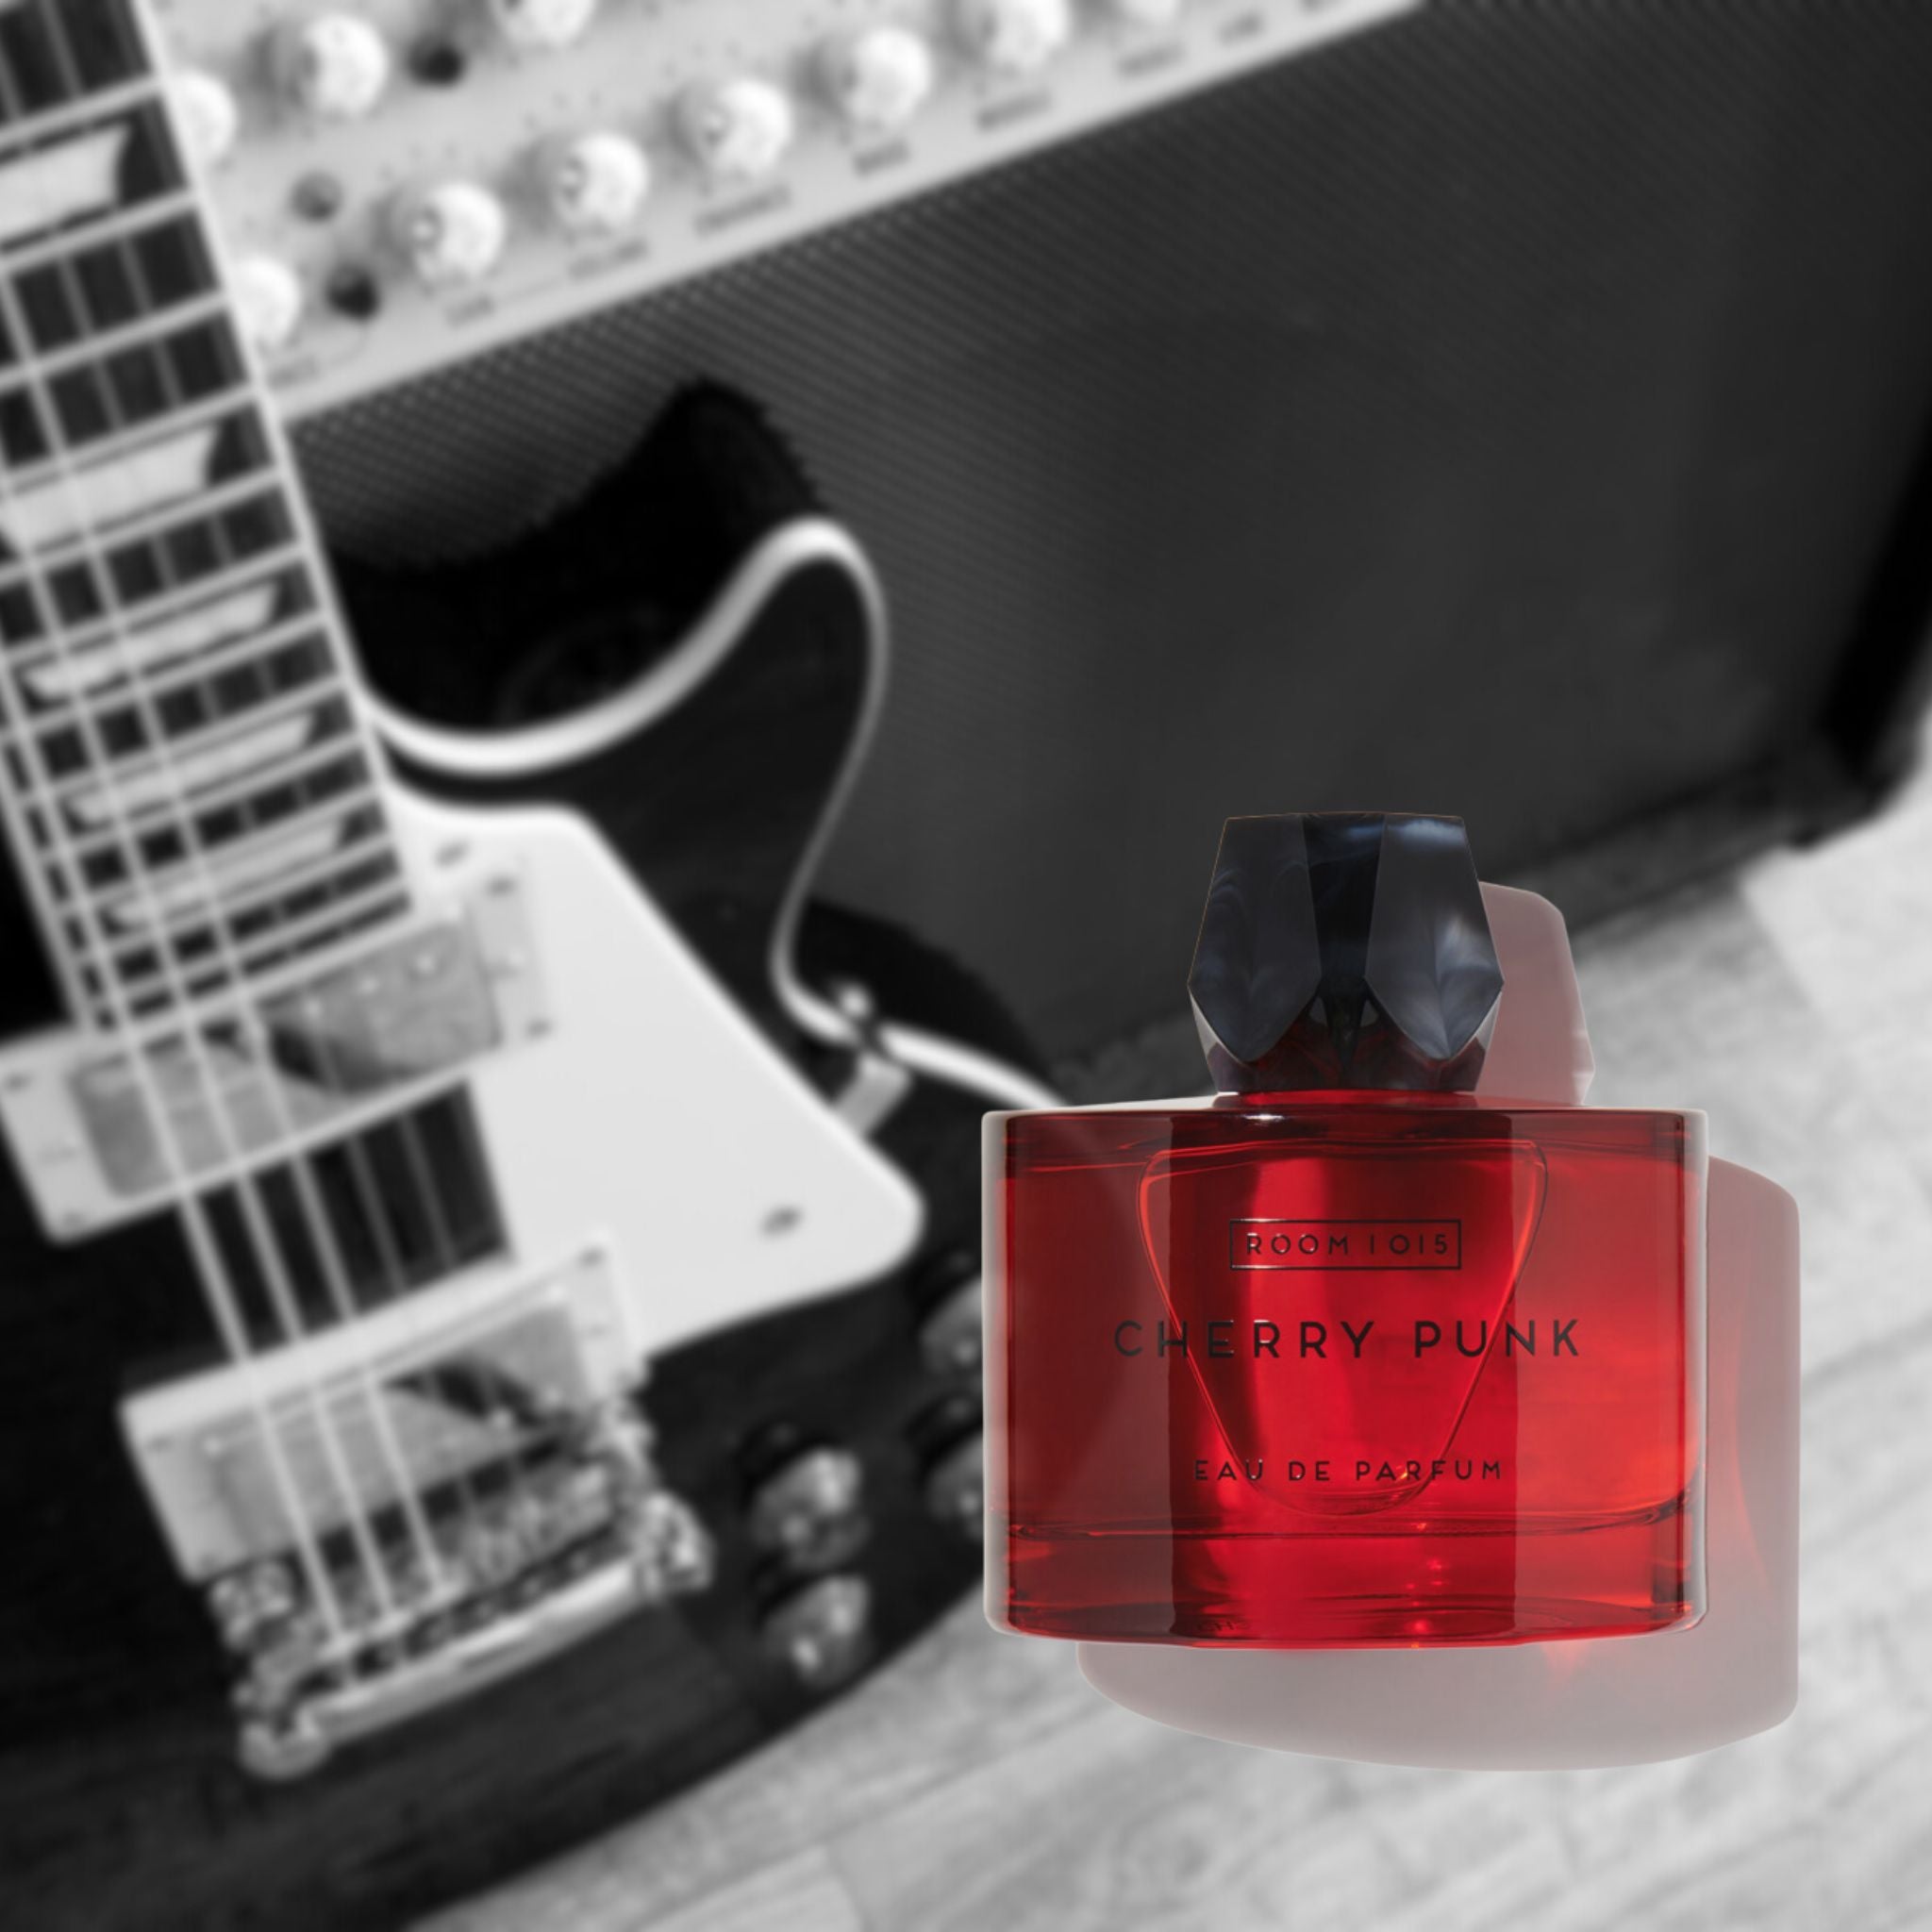 Cherry Punk by Room 1015  The New Scent Rebellion - Experience